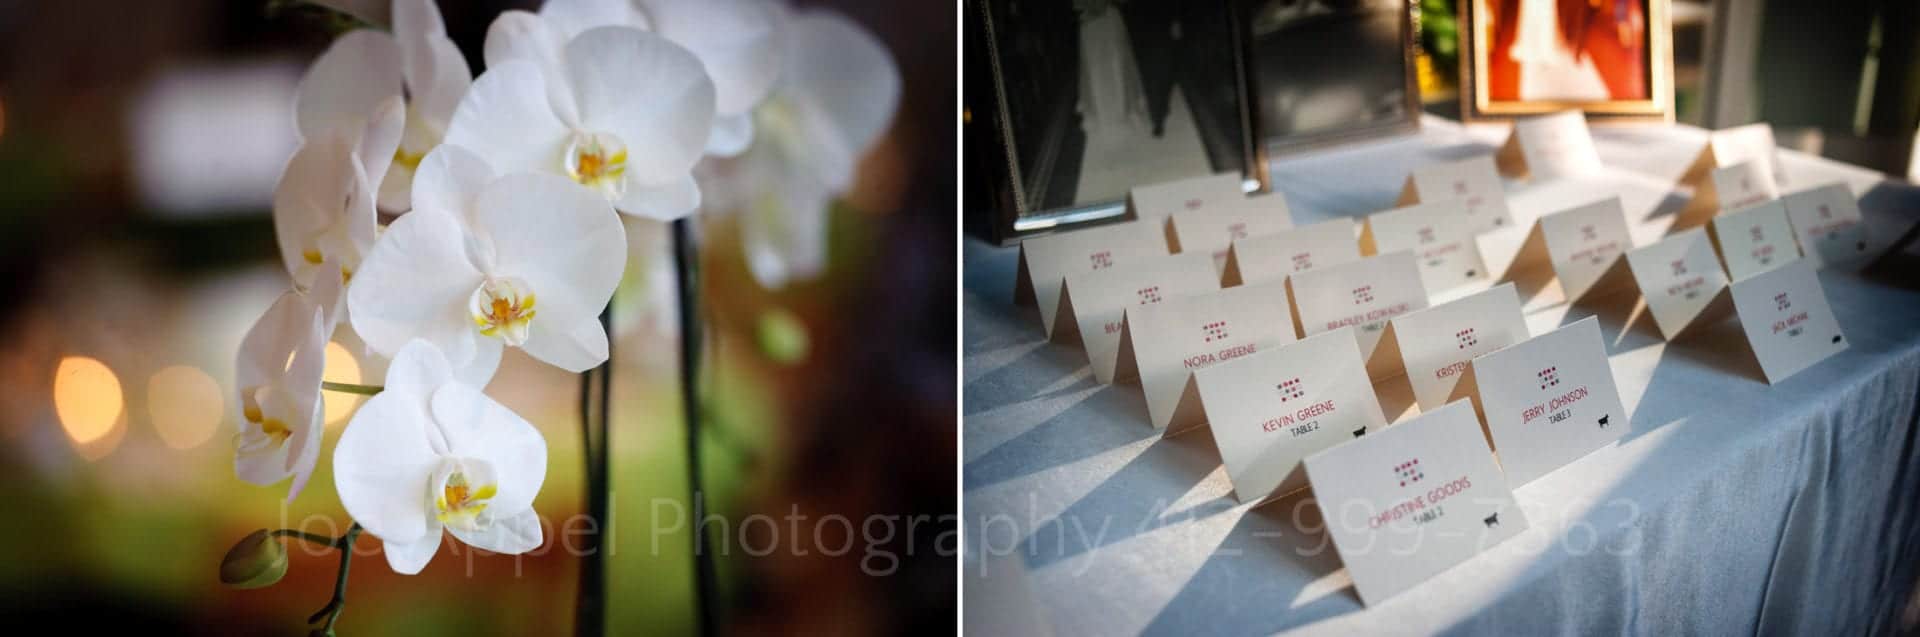 place cards sit on a white table with photographs and white flowers Phipps Conservatory Weddings